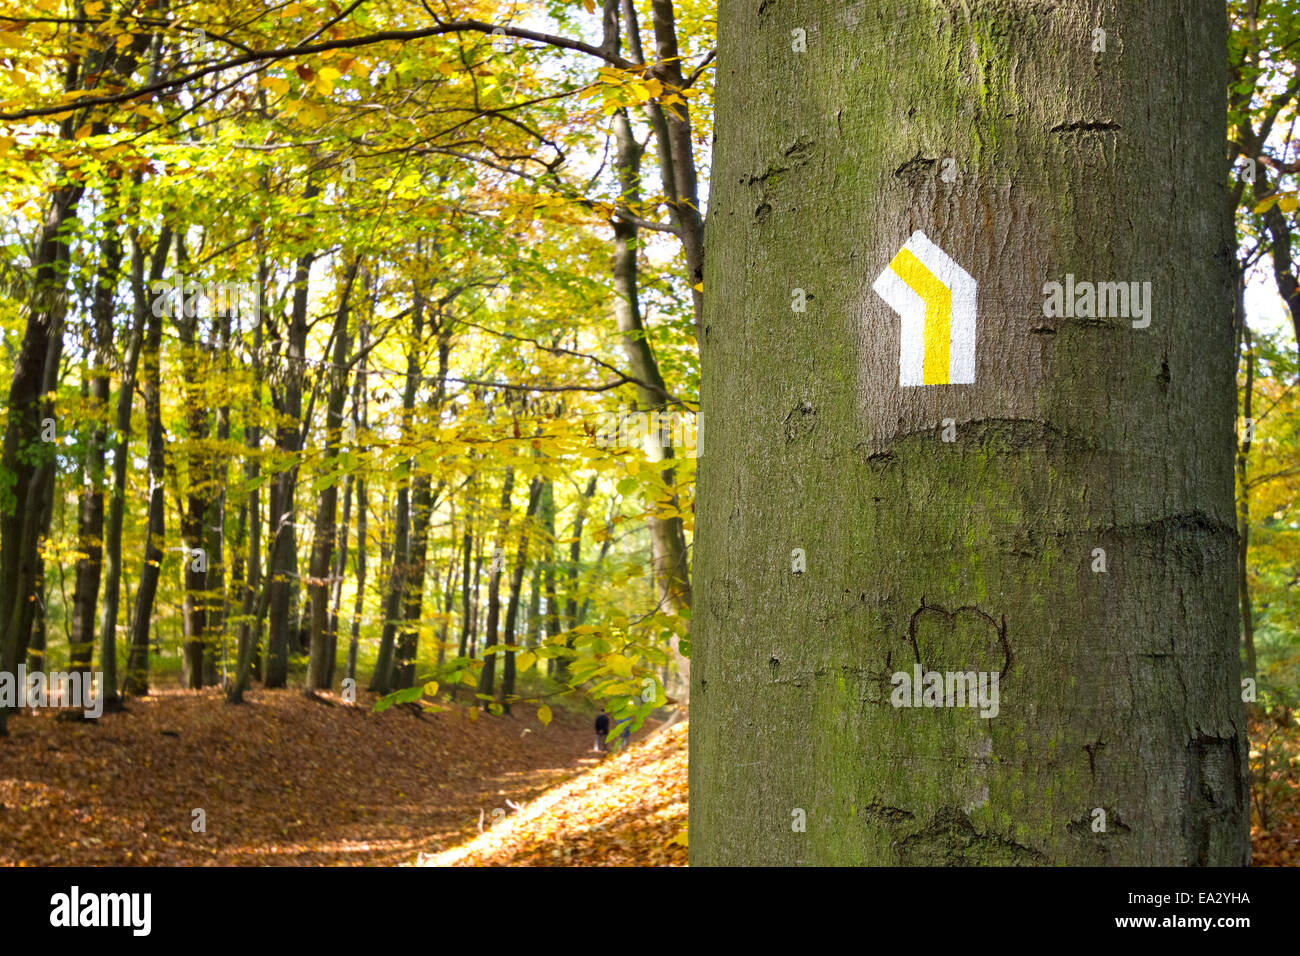 Walking trail sign on the tree in a park. Stock Photo